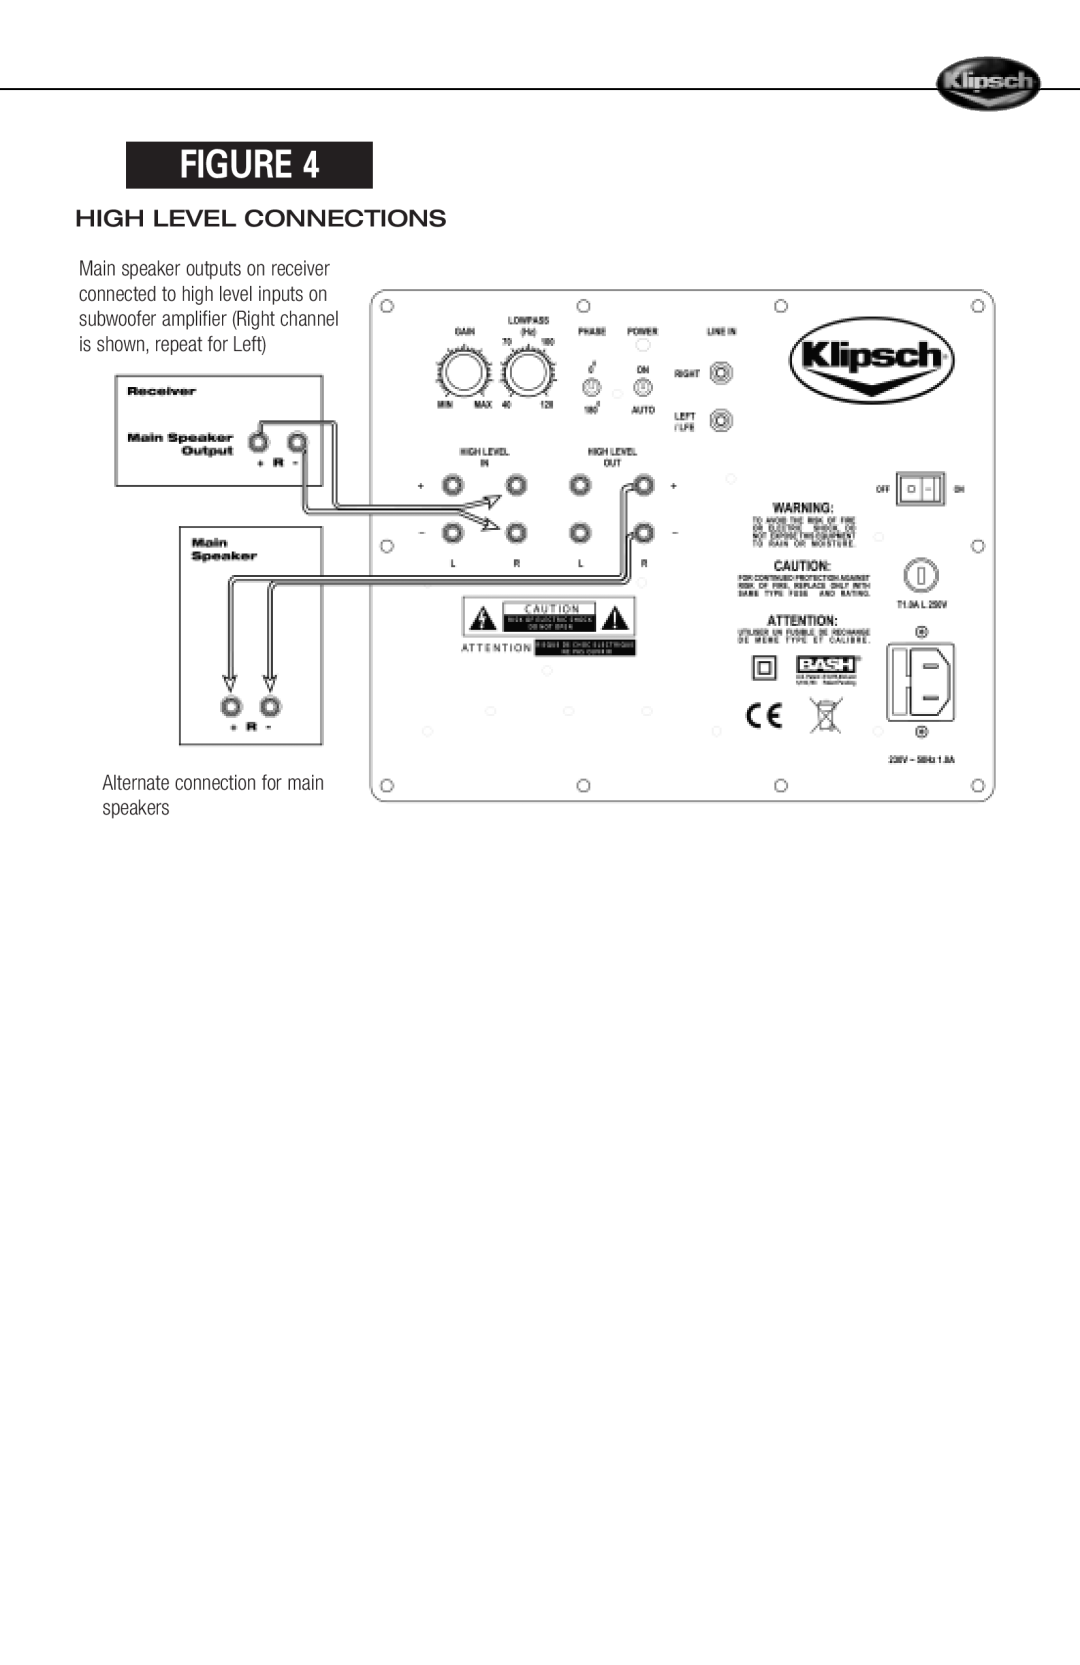 Klipsch RPW-10 manual High Level Connections, Alternate connection for main speakers 